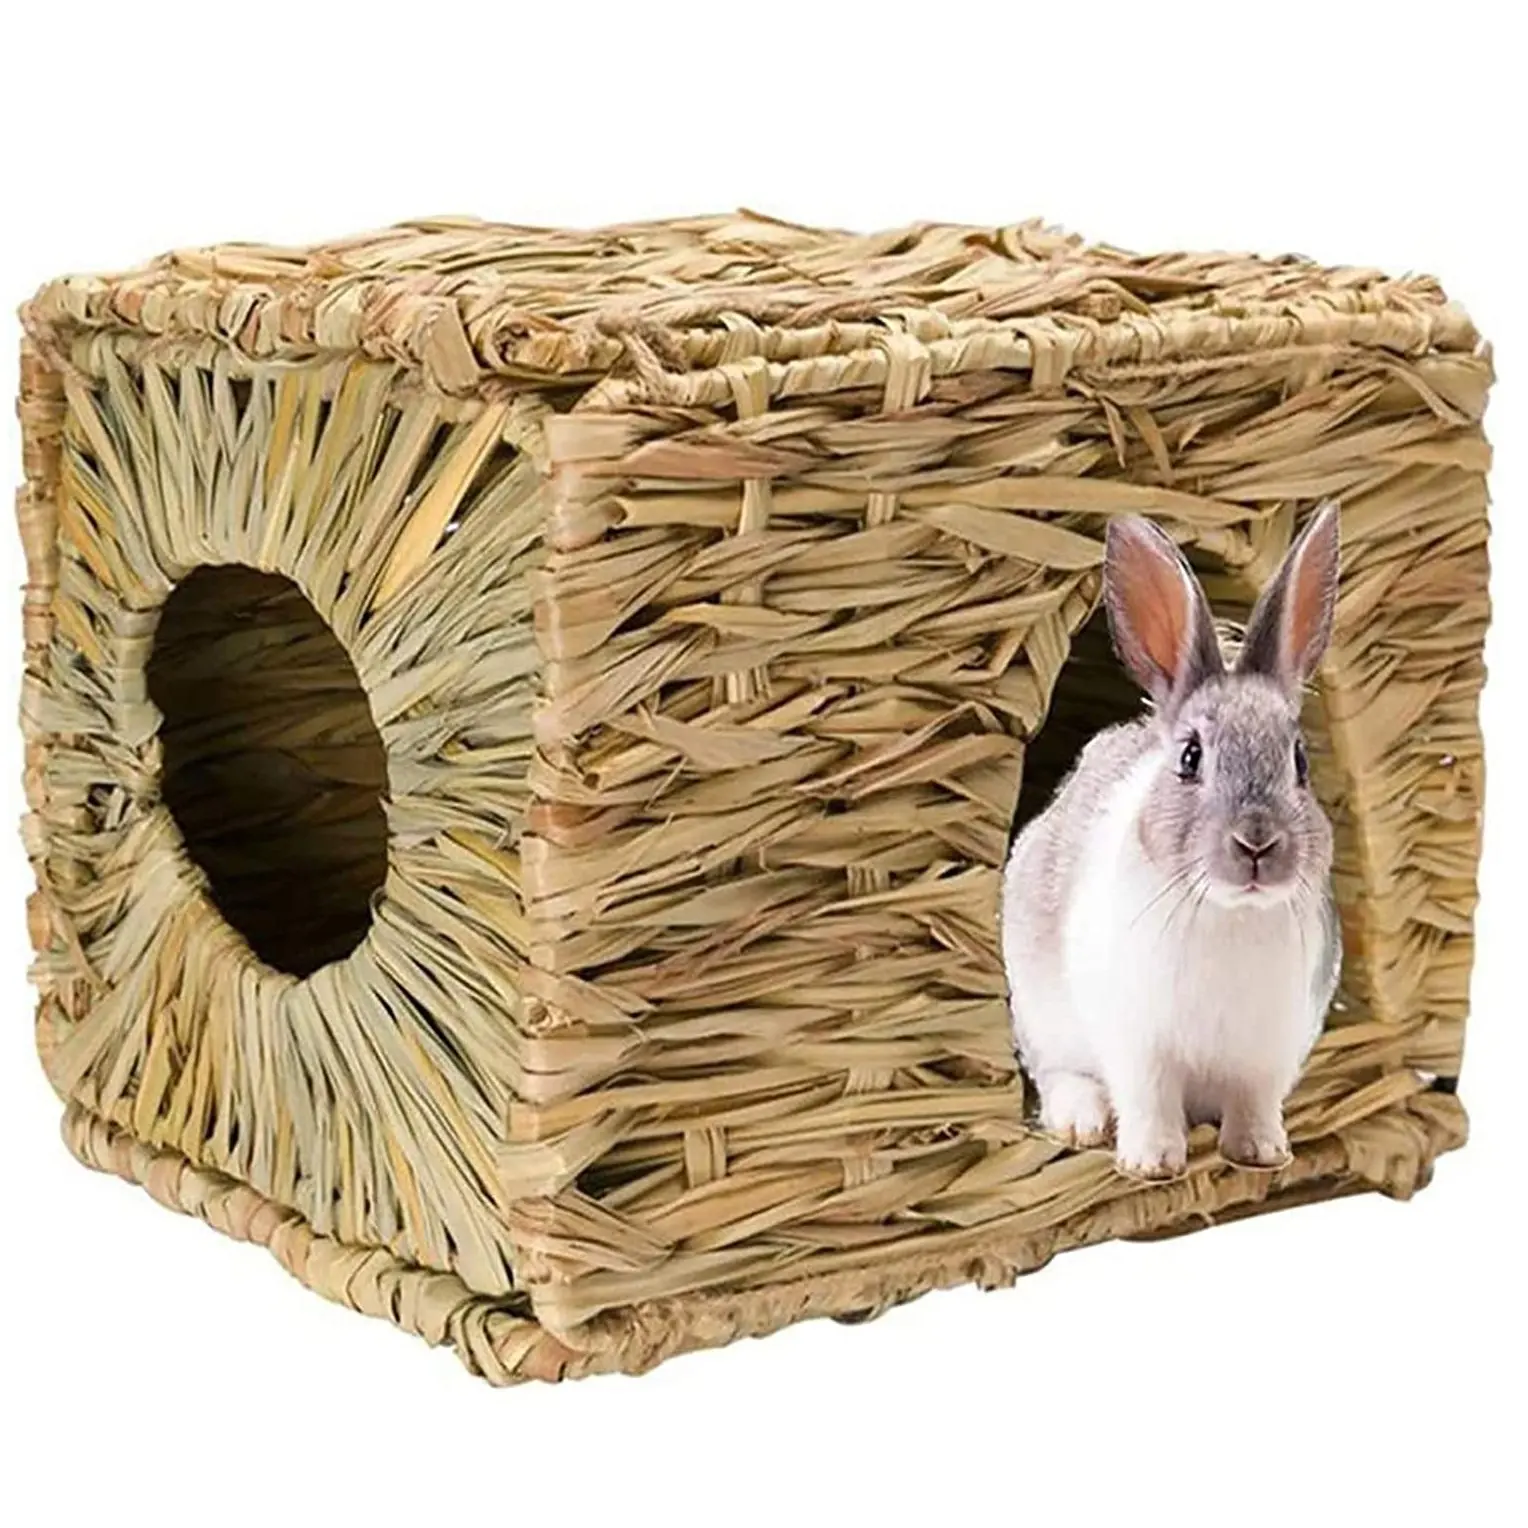 Rabbit Grass House- Natural Hand Woven Seagrass Play Hay Bed, Hideaway Hut Grass Mat for Bunny Hamster Guinea Pig Ferret